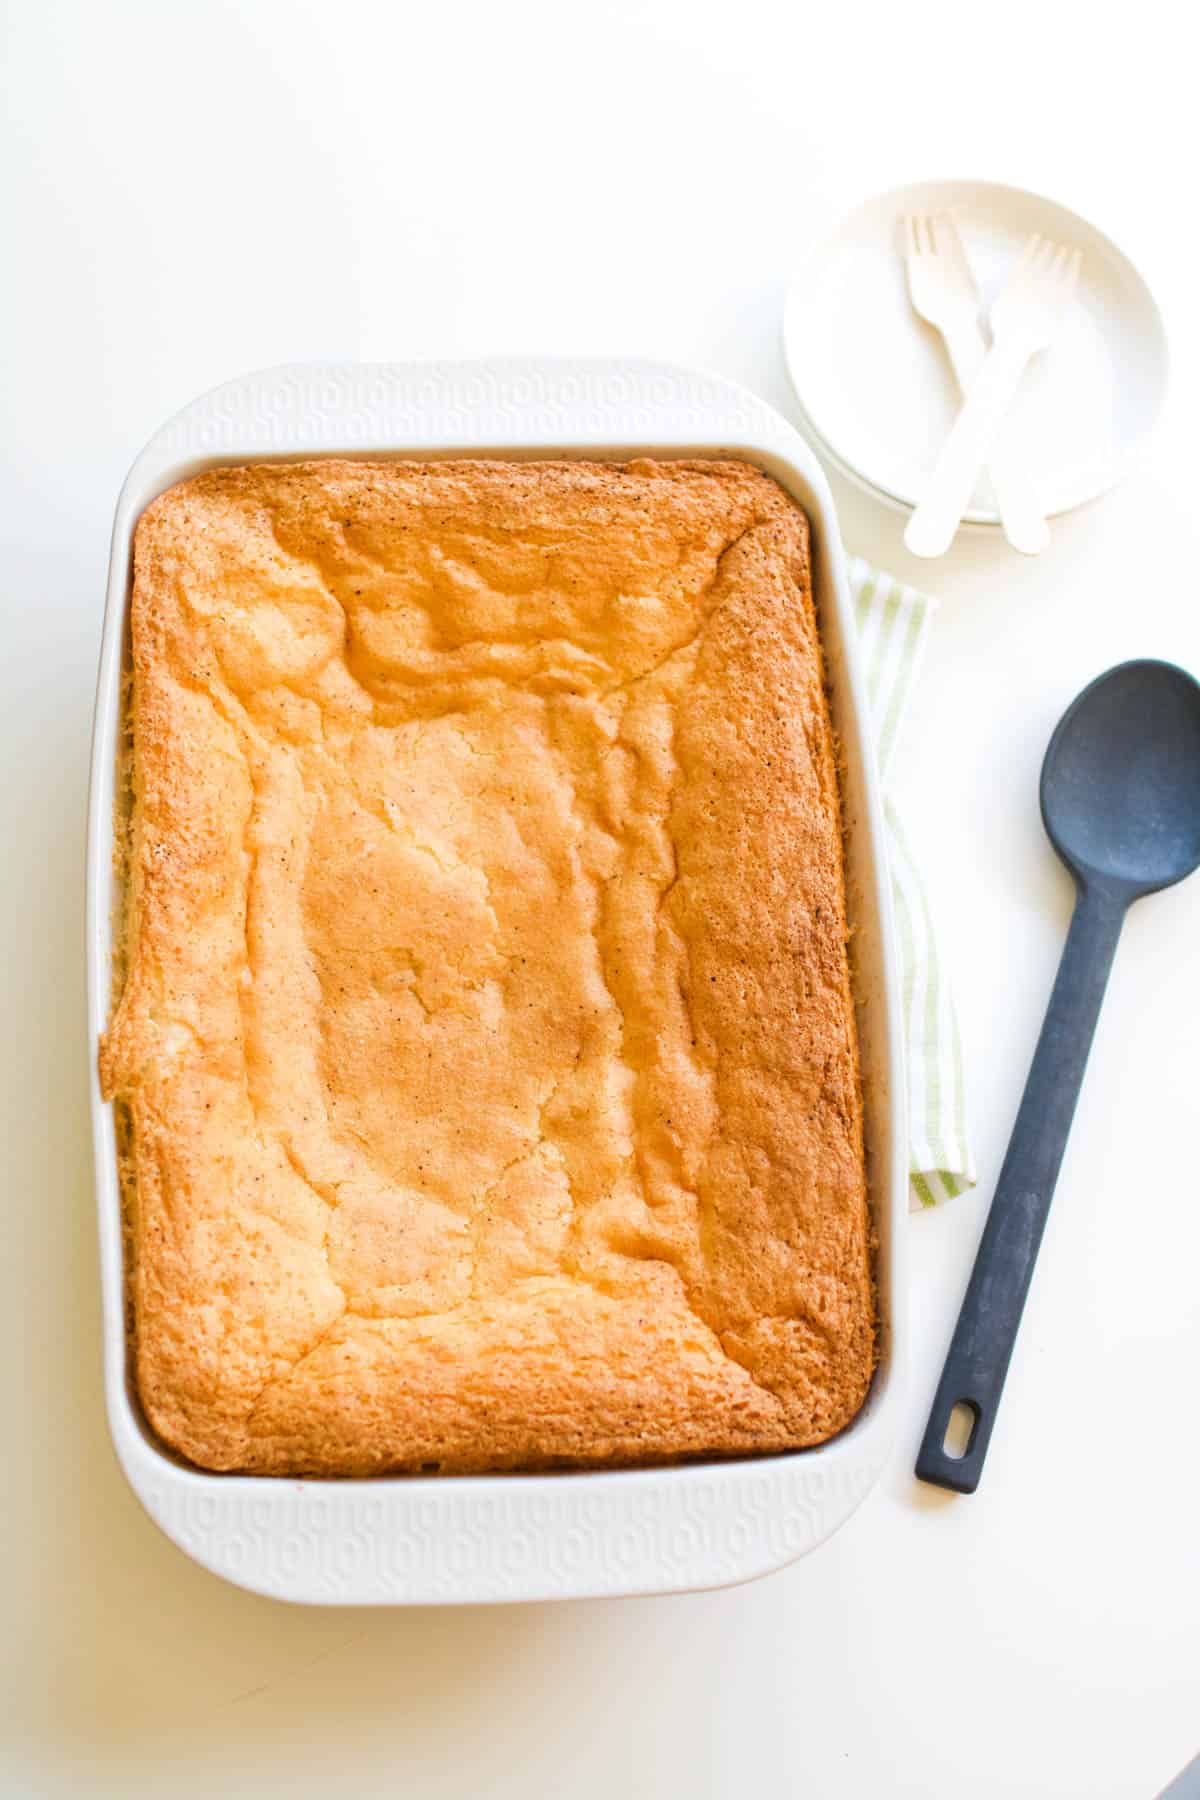 A baking dish with baked angel food cake on top of a dump cake.